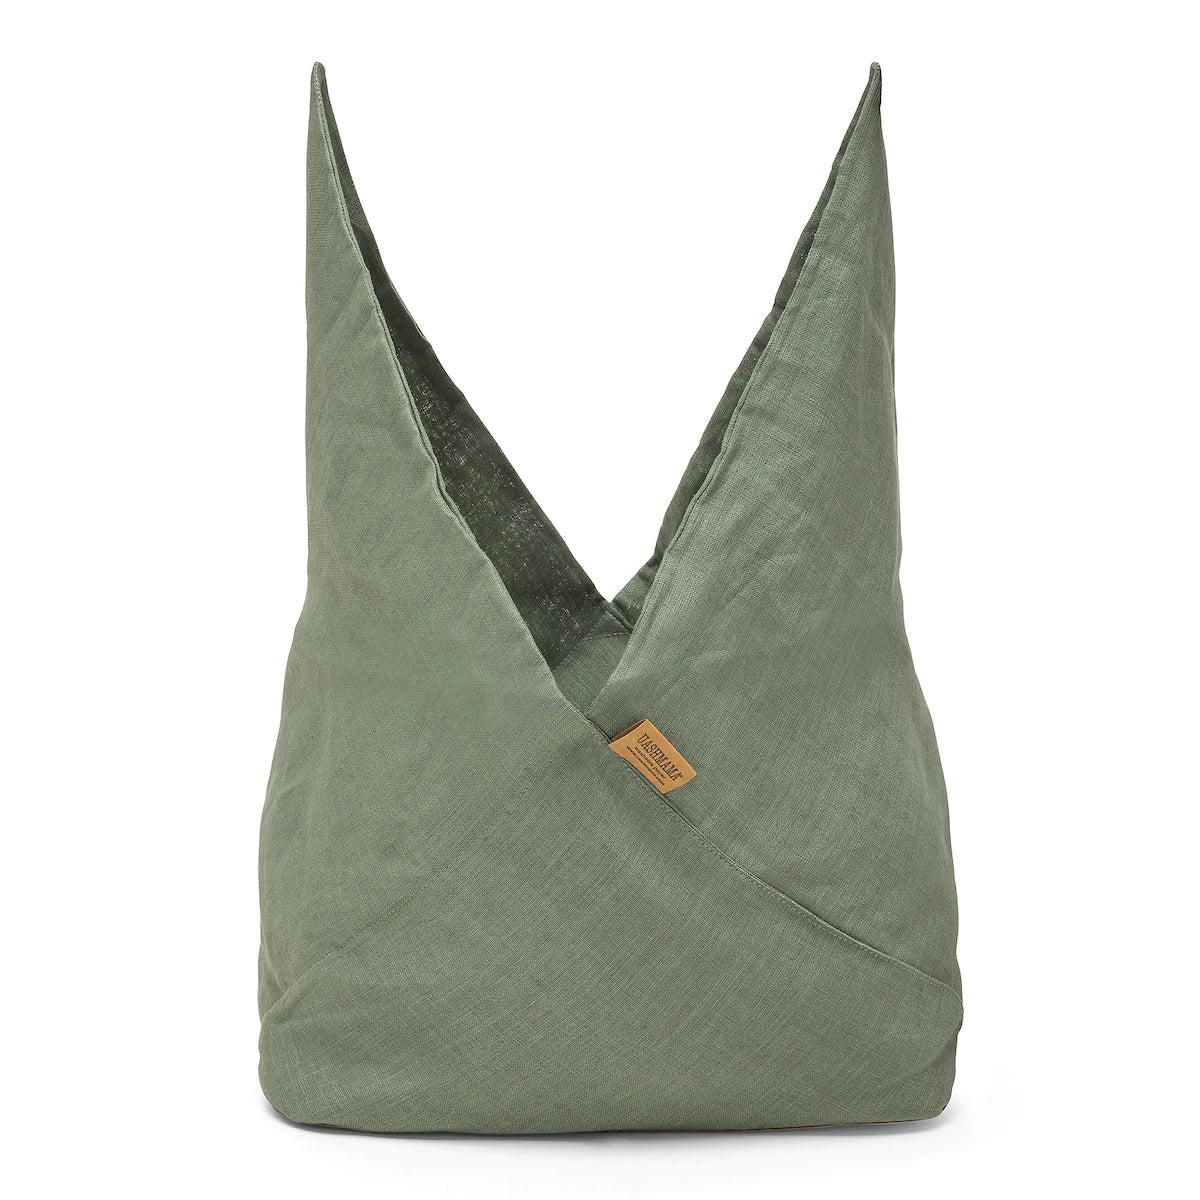 A large green linen bread bag is shown open, with the top fully unfurled, pointing skywards.